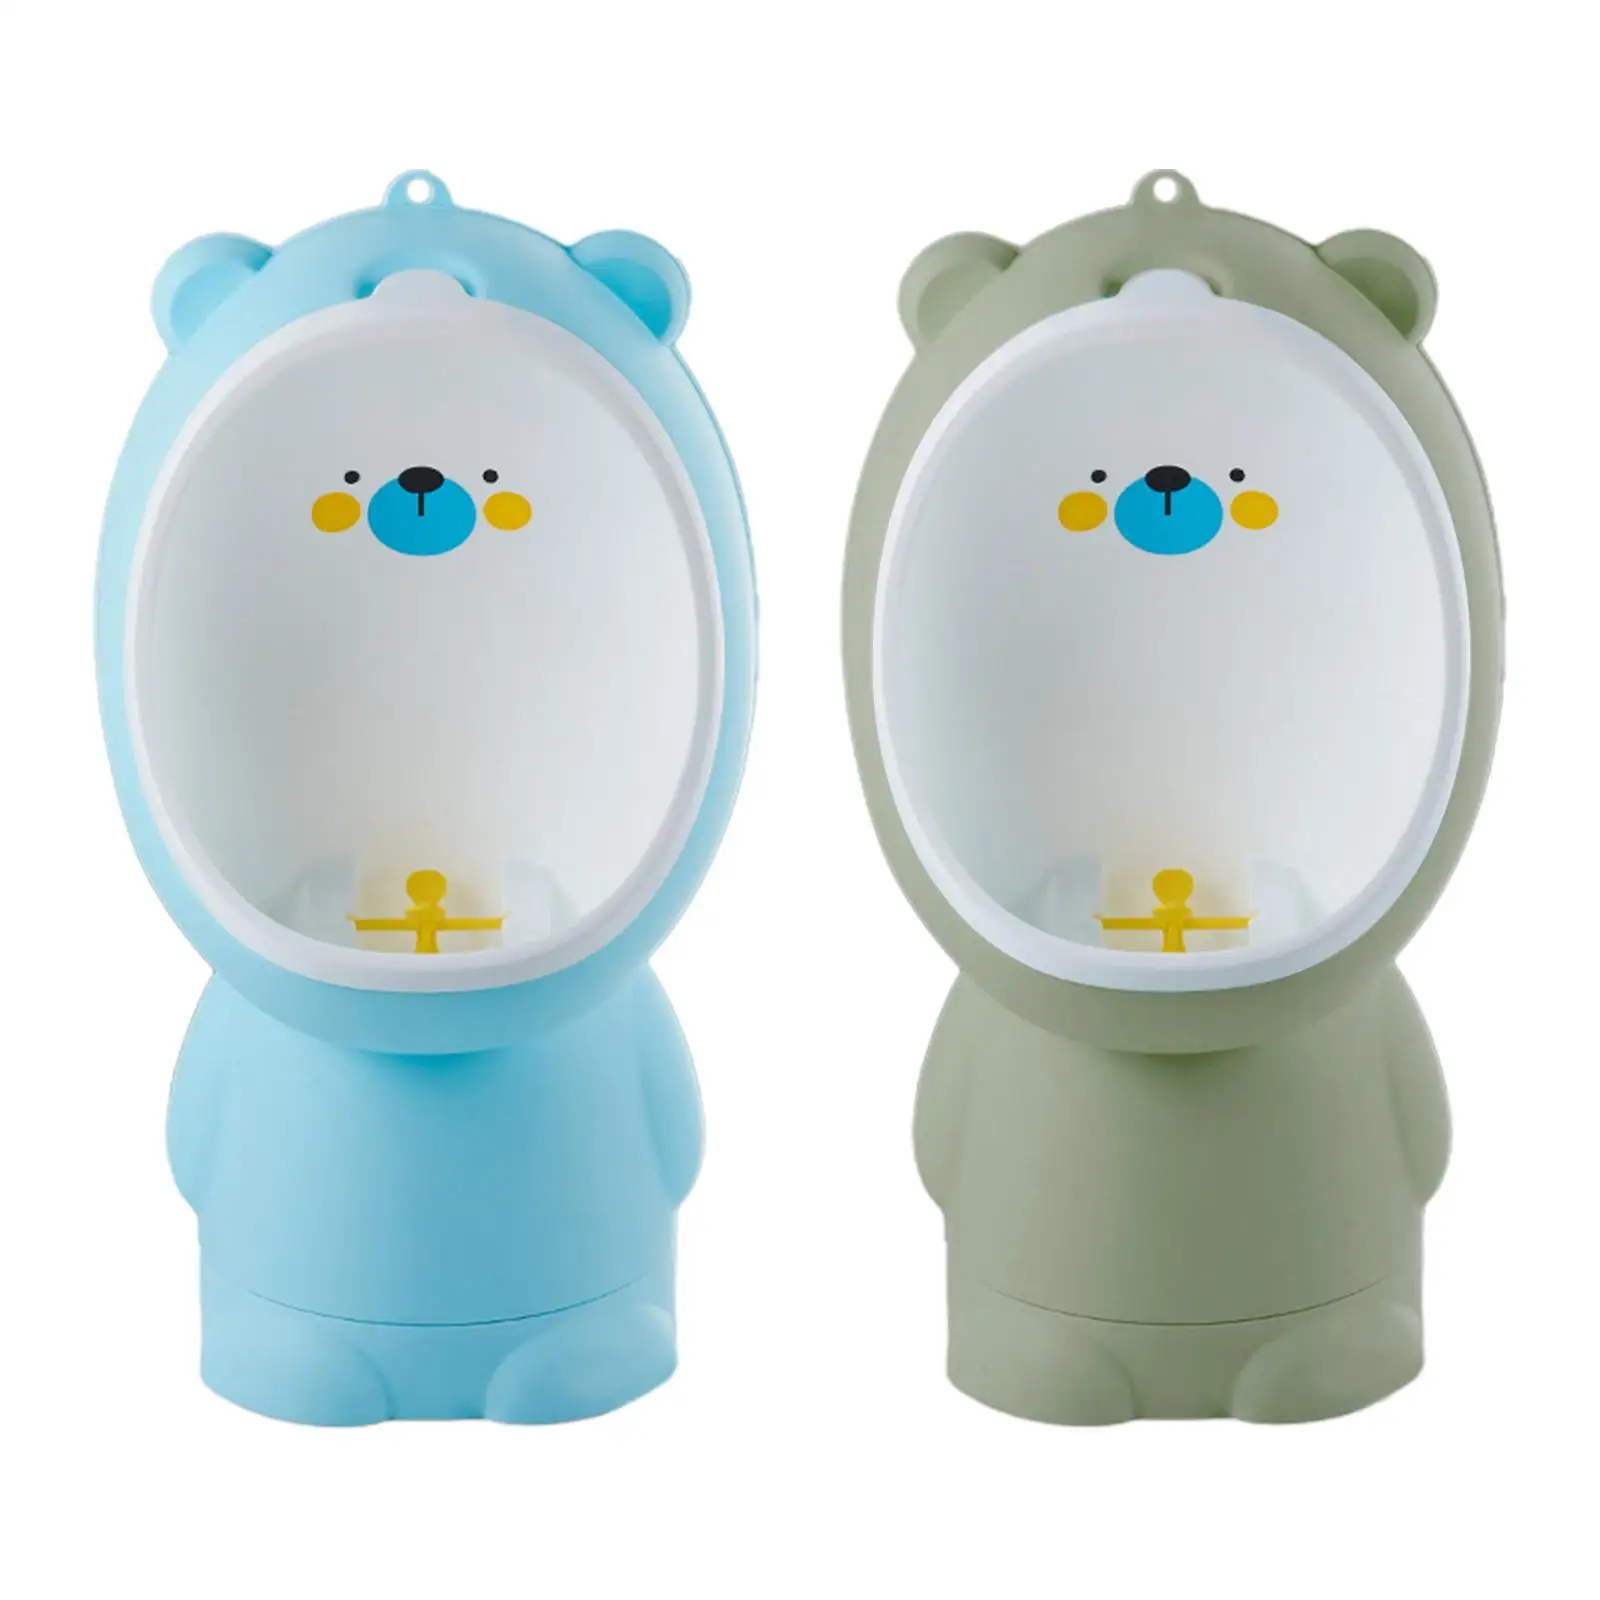 Hanging Pee Trainer Adjustable Height with Aiming Target Standing Potty Wall Mounted for Kids Boys Toddlers Baby Child